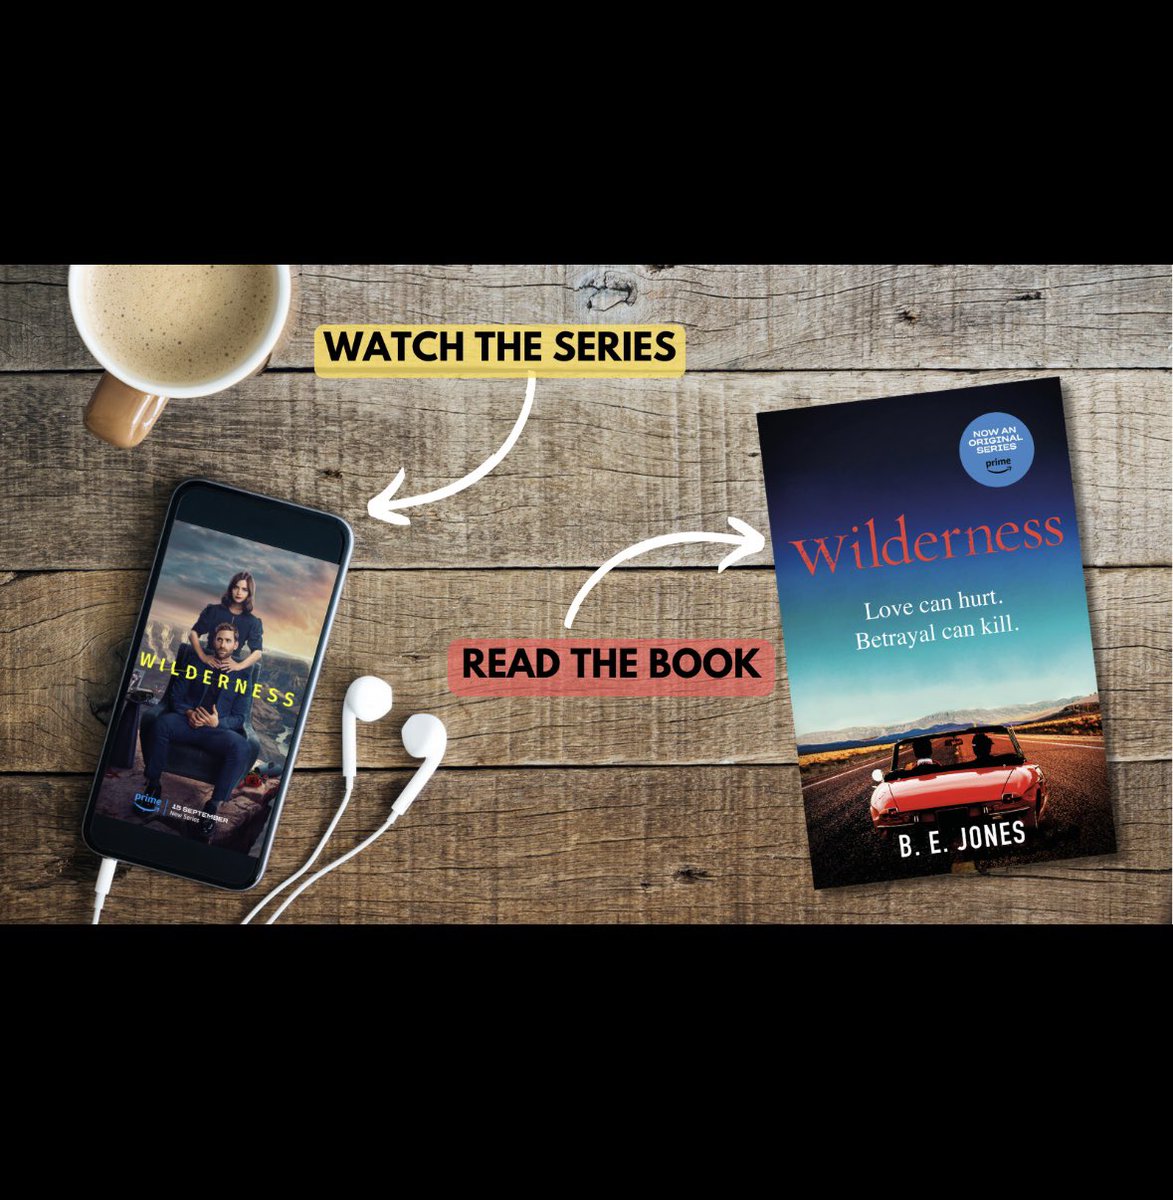 Seen the show on @PrimeVideo Read the book for just £2.99 now @TheCrimeVault Join the original dream road trip that turns deadly, starring Jenna Coleman and Oliver Jackson- Cohen. Look what he made her do! 😱amzn.to/3OGWg3L #Wilderness #Bargain #crime